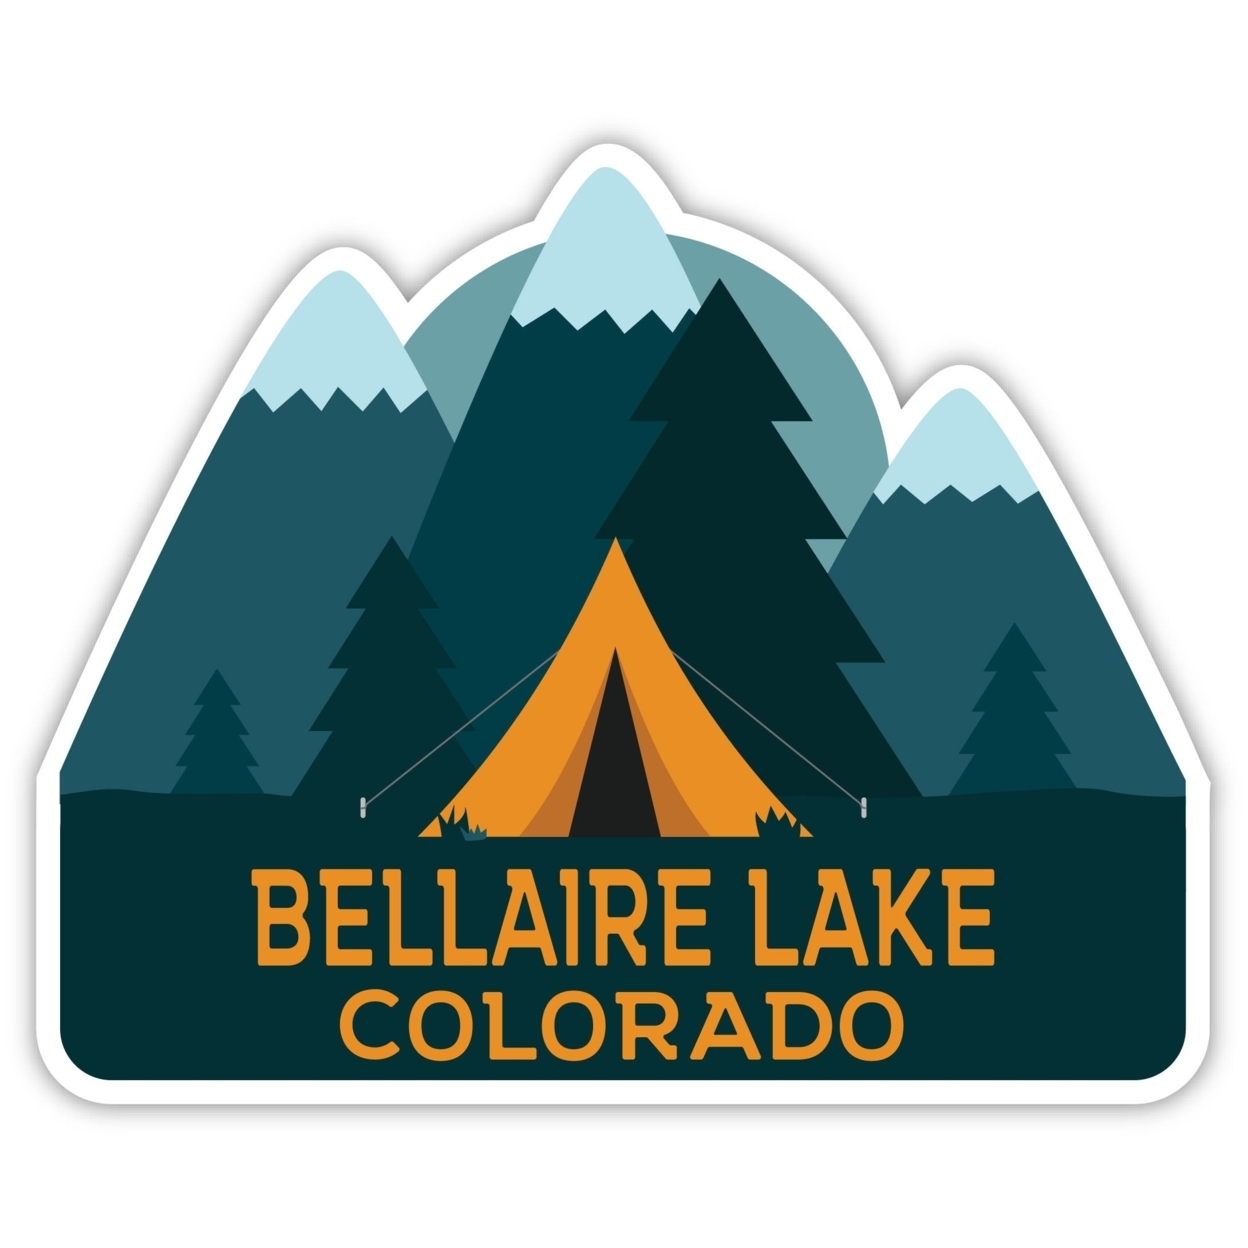 Bellaire Lake Colorado Souvenir Decorative Stickers (Choose Theme And Size) - 4-Pack, 8-Inch, Tent